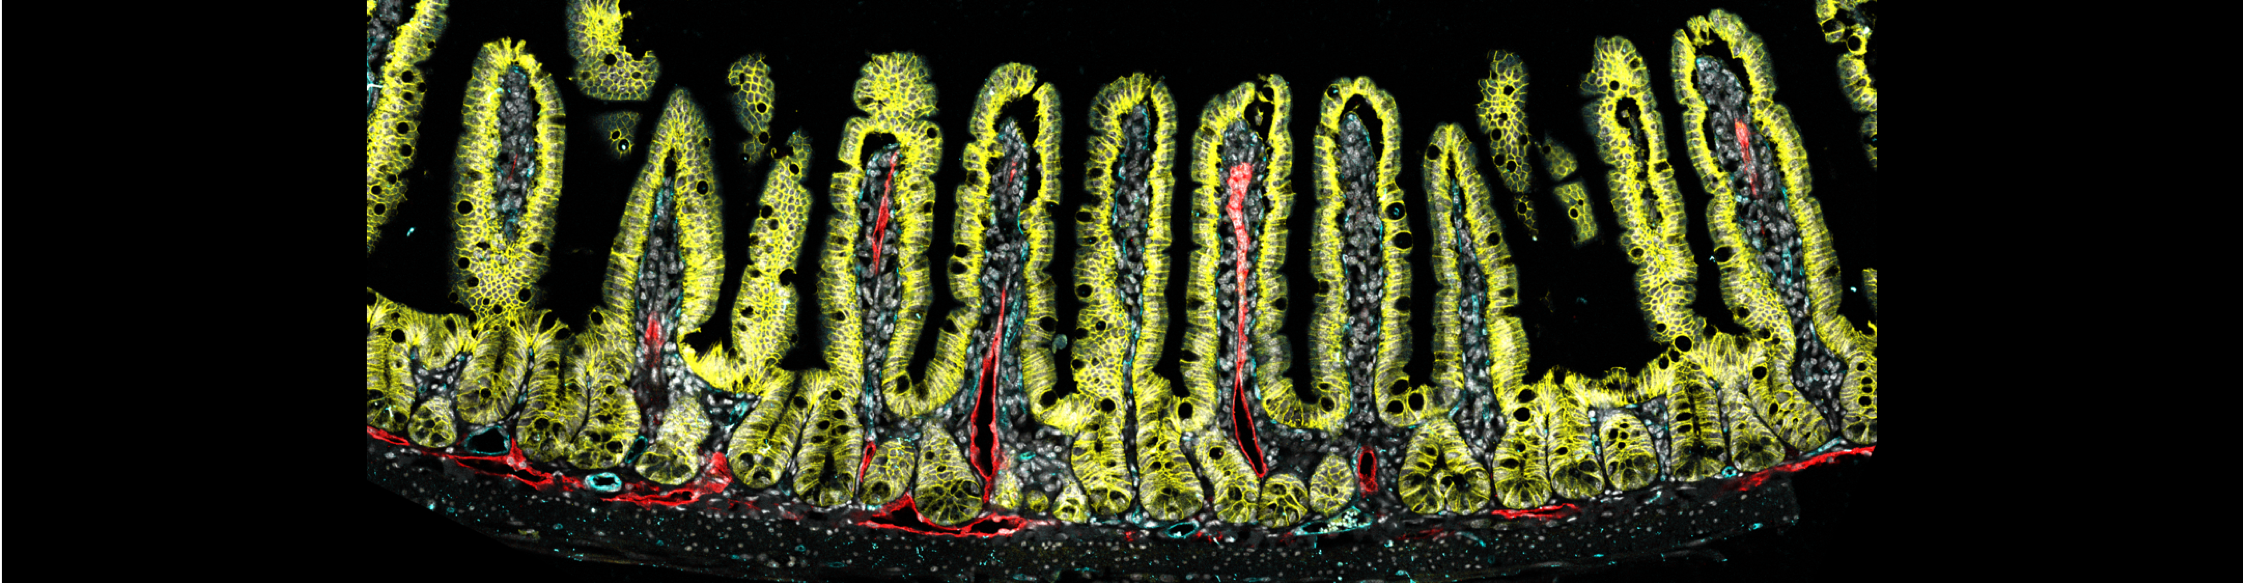 Mouse gut stained for enterocytes (yellow), blood vessels (cyan), and lymphatics (red)